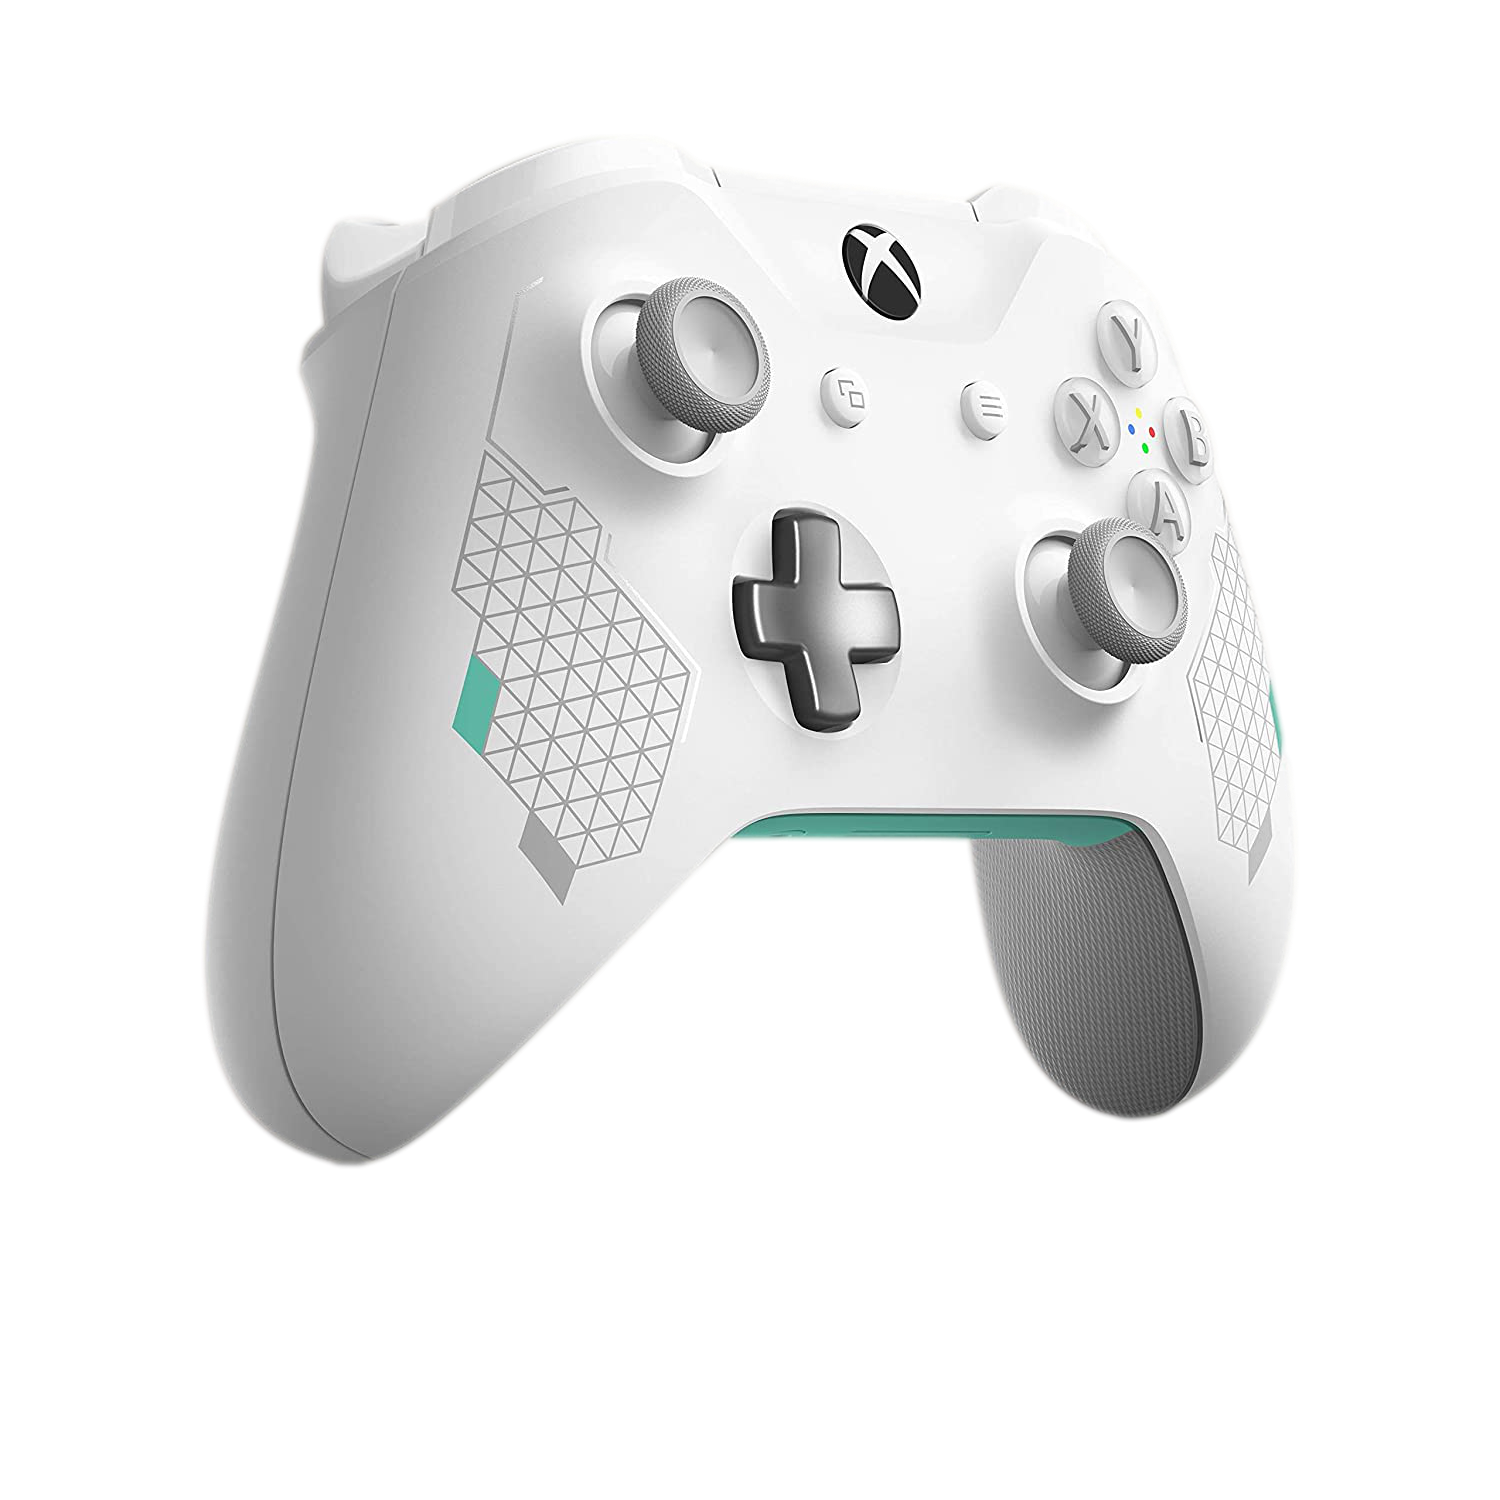 Microsoft-Official-Xbox-Controller-Sports-White-Special-Edition-12-Months-Warranty-2